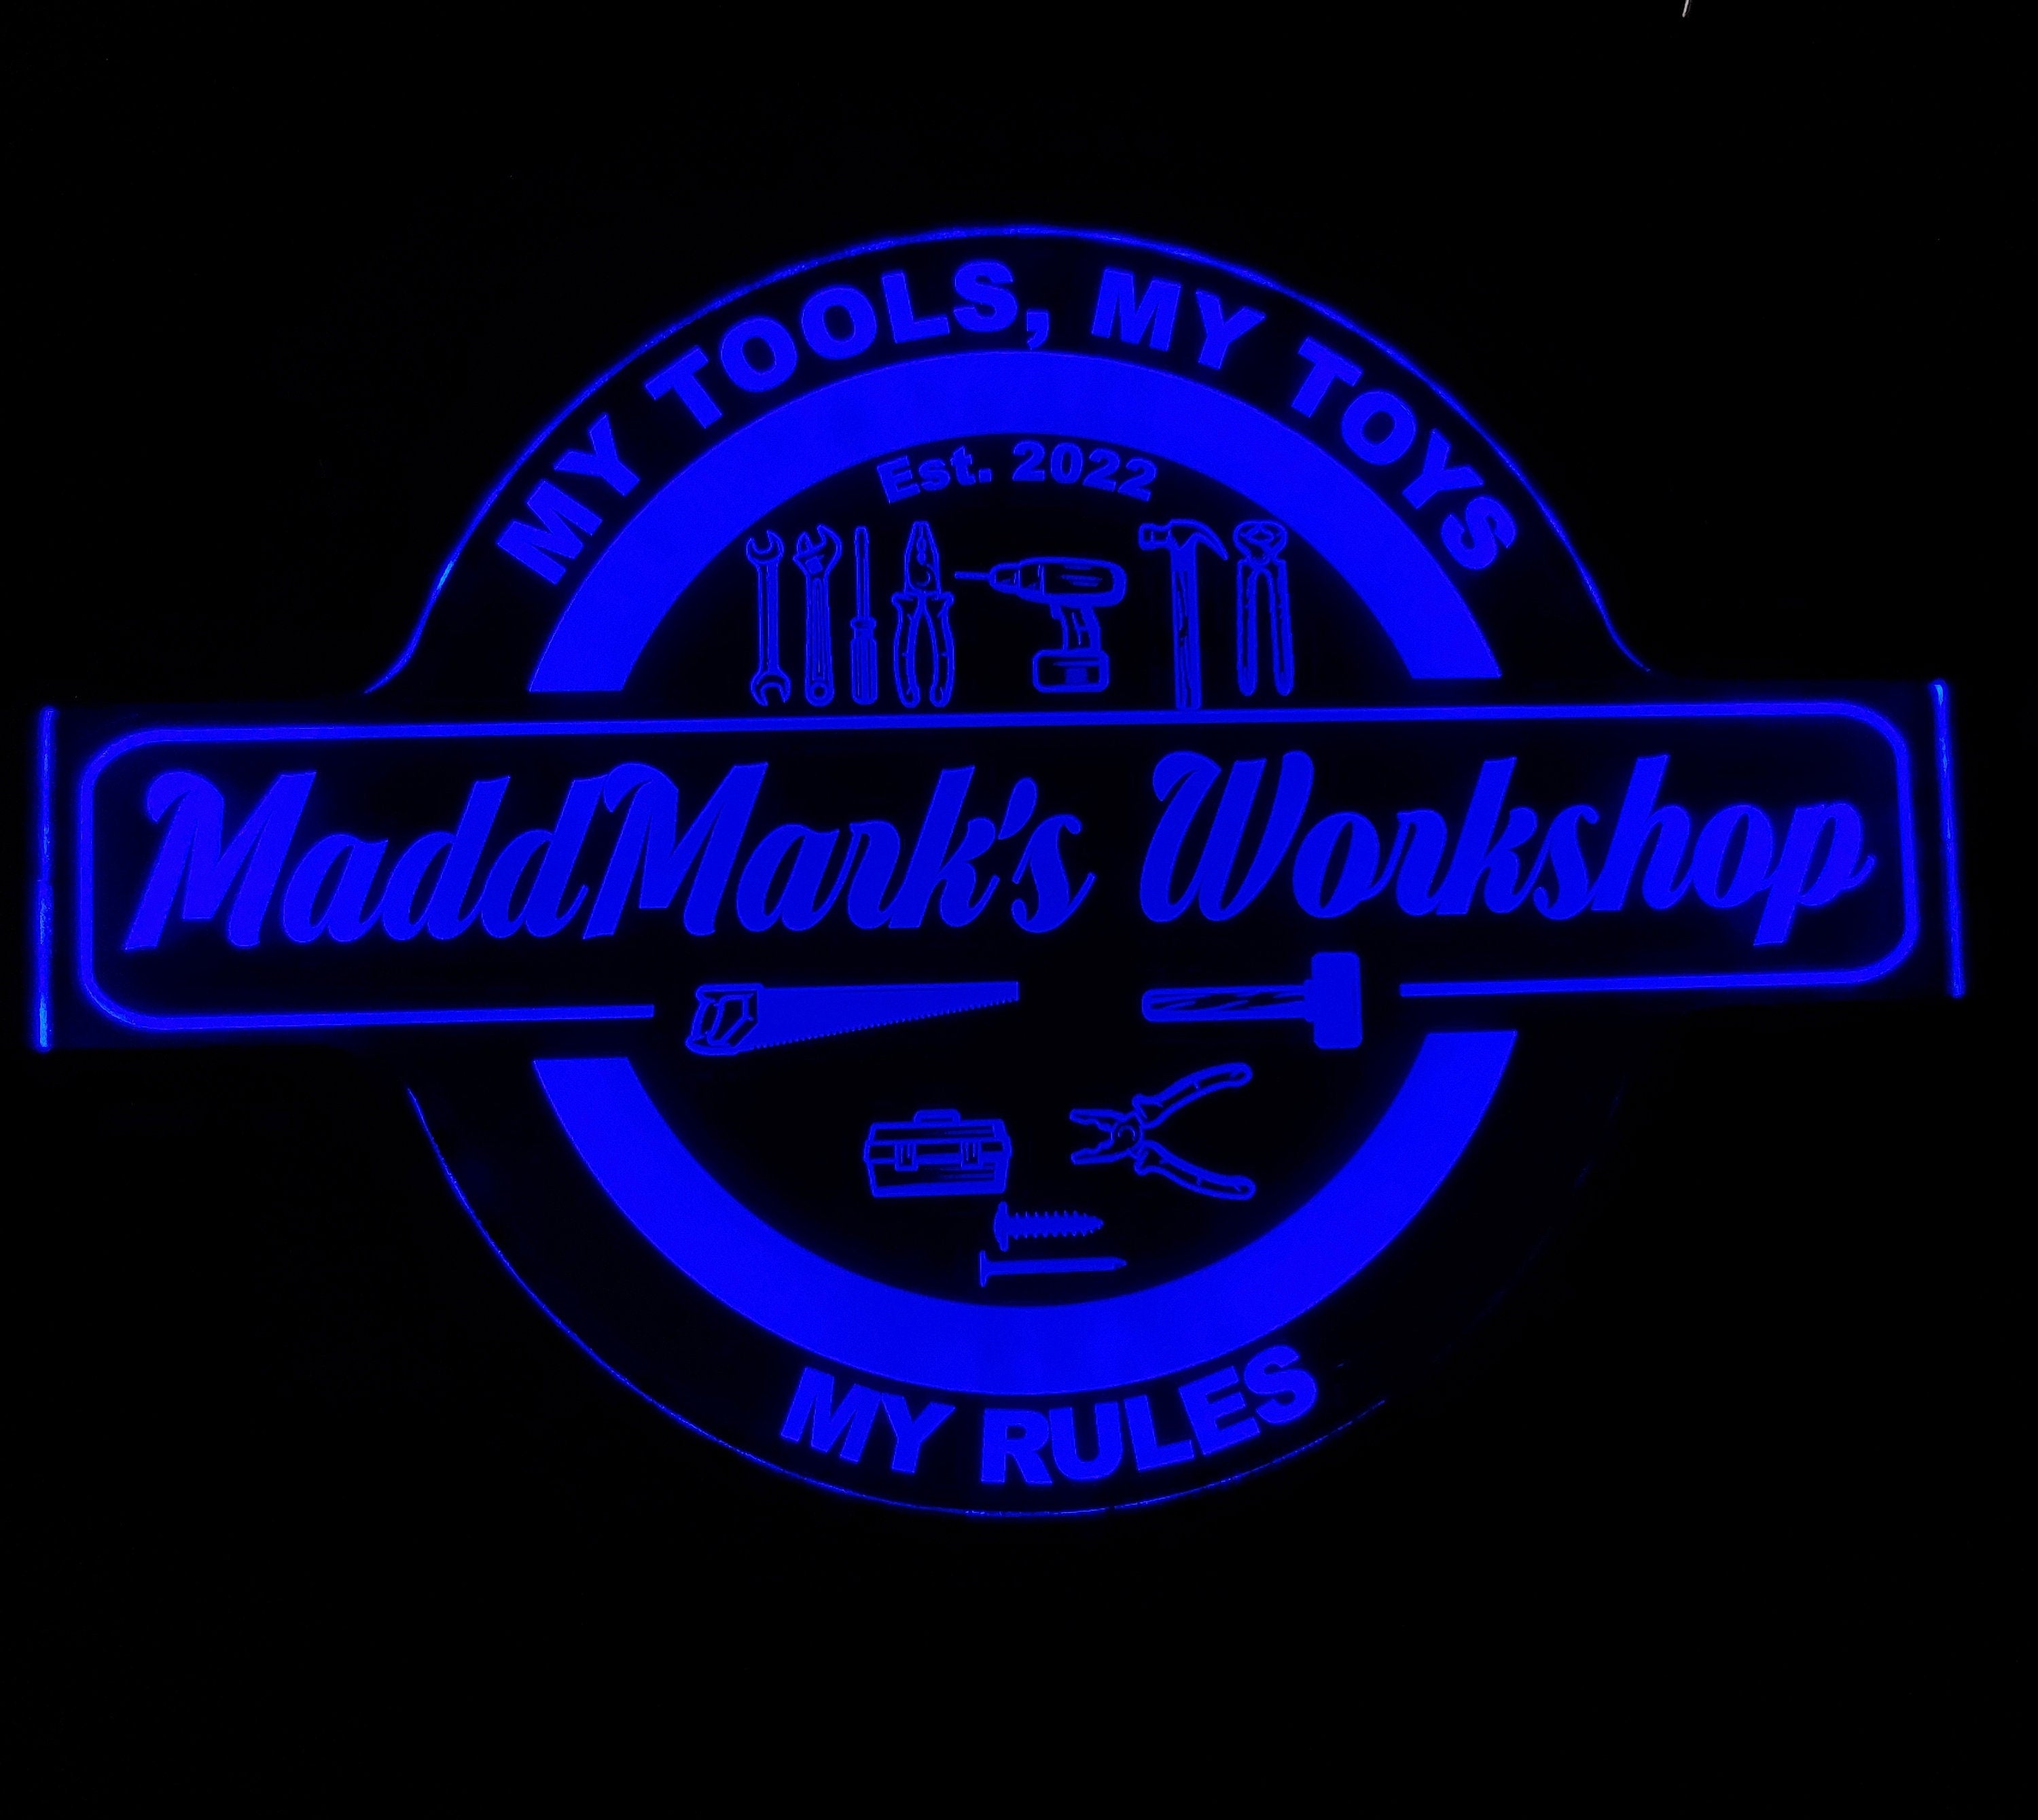 Custom Workshop Handyman Carpenter Led Wall Sign Neon Like - Color Changing Remote Control - 4 Sizes Free Shipping